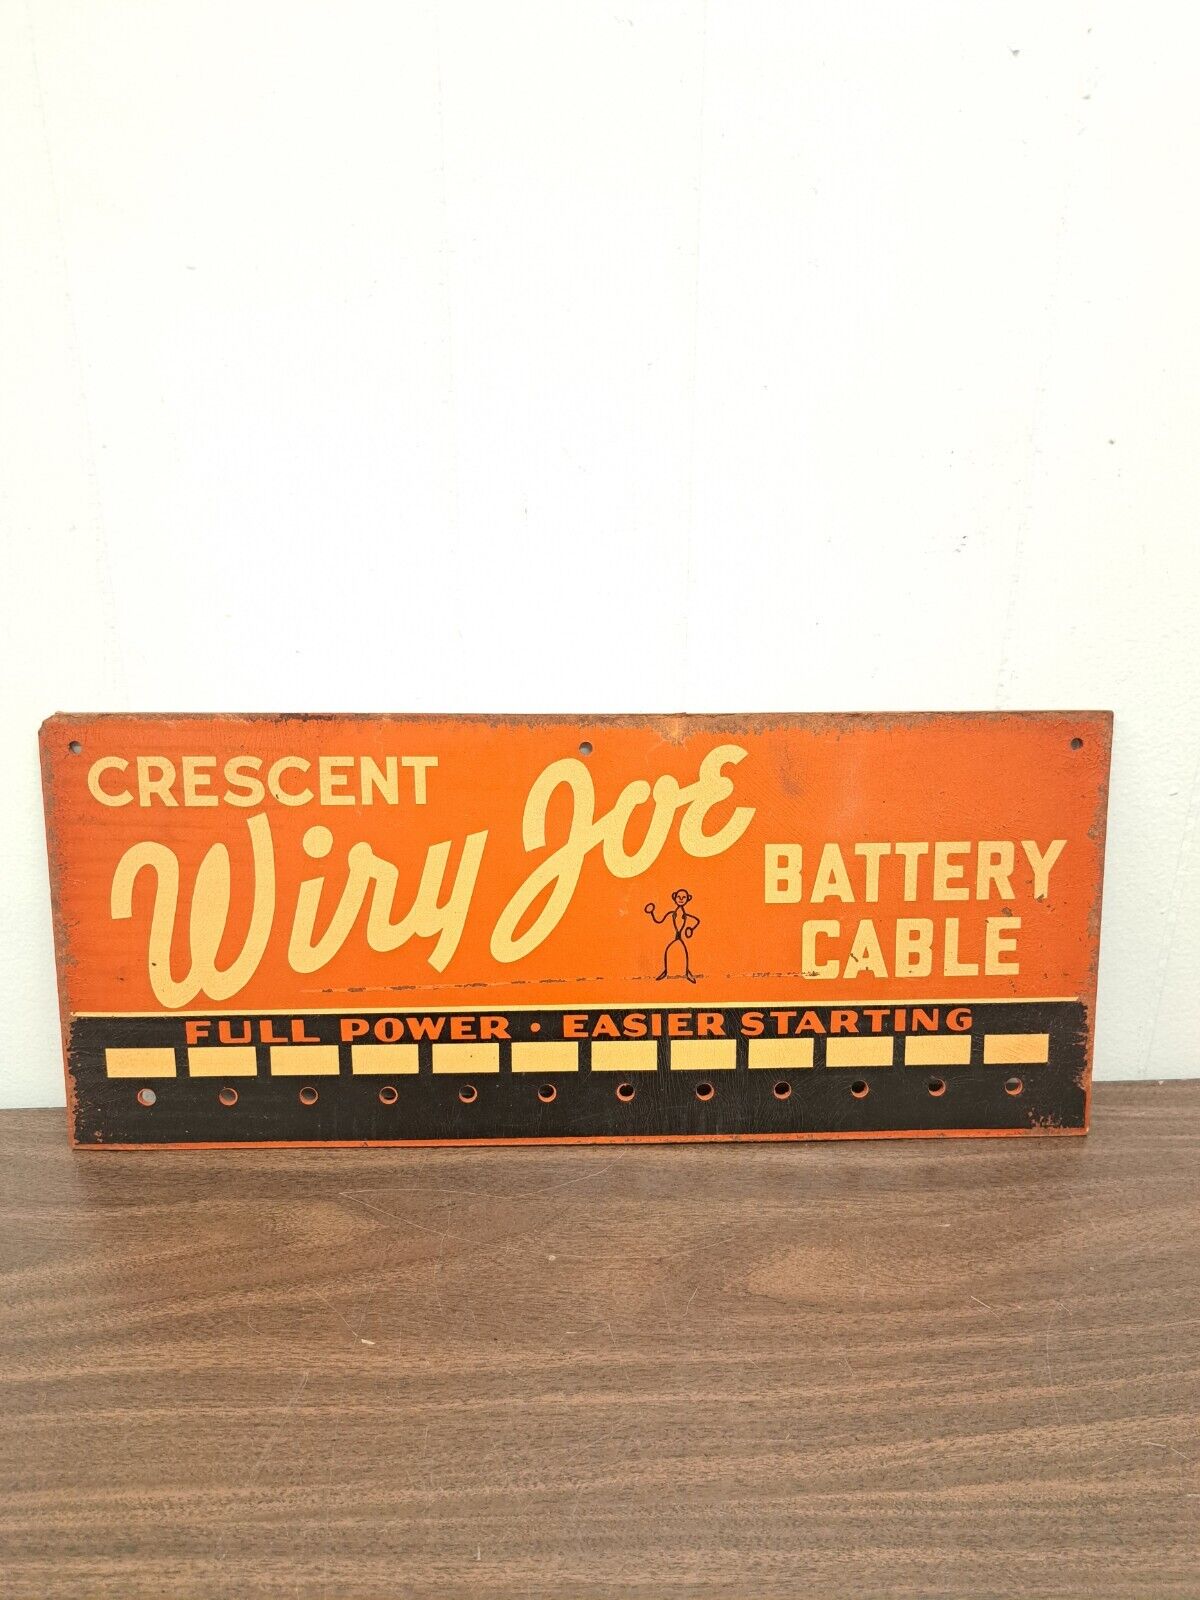 Crescent Wiry Joe Battery Cable Rack - 1940-1950s vintage sign Advertising Rare